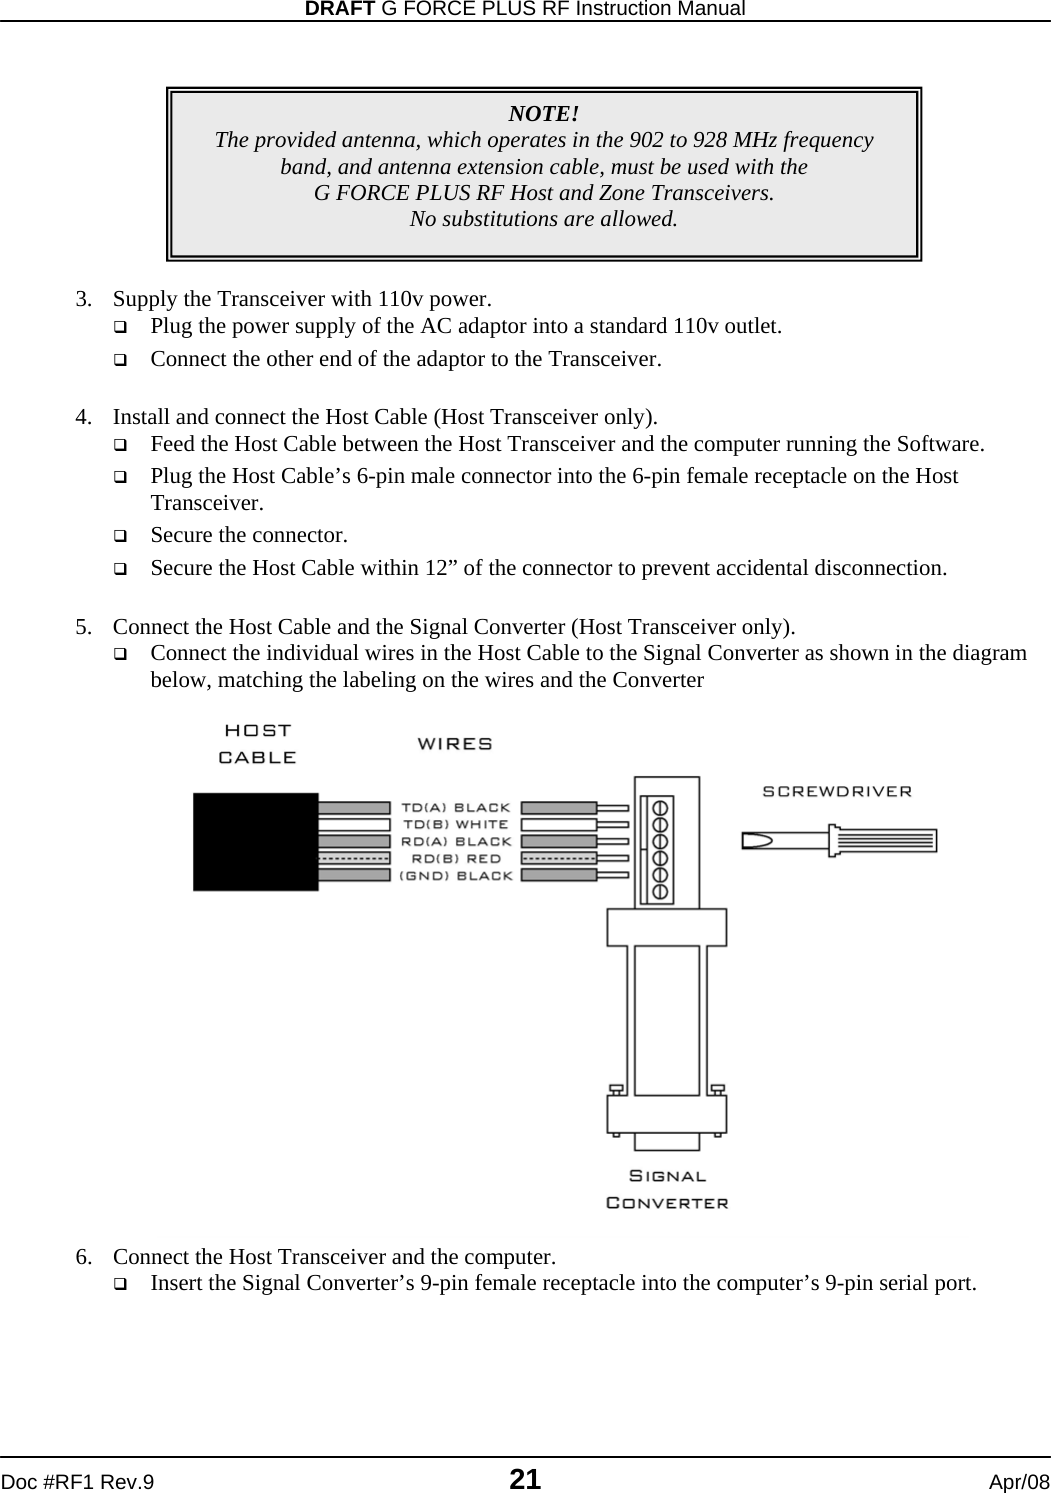 DRAFT G FORCE PLUS RF Instruction Manual   Doc #RF1 Rev.9  21  Apr/08          3. Supply the Transceiver with 110v power.  Plug the power supply of the AC adaptor into a standard 110v outlet.  Connect the other end of the adaptor to the Transceiver.  4. Install and connect the Host Cable (Host Transceiver only).  Feed the Host Cable between the Host Transceiver and the computer running the Software.  Plug the Host Cable’s 6-pin male connector into the 6-pin female receptacle on the Host Transceiver.  Secure the connector.  Secure the Host Cable within 12” of the connector to prevent accidental disconnection.  5. Connect the Host Cable and the Signal Converter (Host Transceiver only).  Connect the individual wires in the Host Cable to the Signal Converter as shown in the diagram below, matching the labeling on the wires and the Converter  6. Connect the Host Transceiver and the computer.  Insert the Signal Converter’s 9-pin female receptacle into the computer’s 9-pin serial port.   NOTE! The provided antenna, which operates in the 902 to 928 MHz frequency band, and antenna extension cable, must be used with the  G FORCE PLUS RF Host and Zone Transceivers.   No substitutions are allowed. 